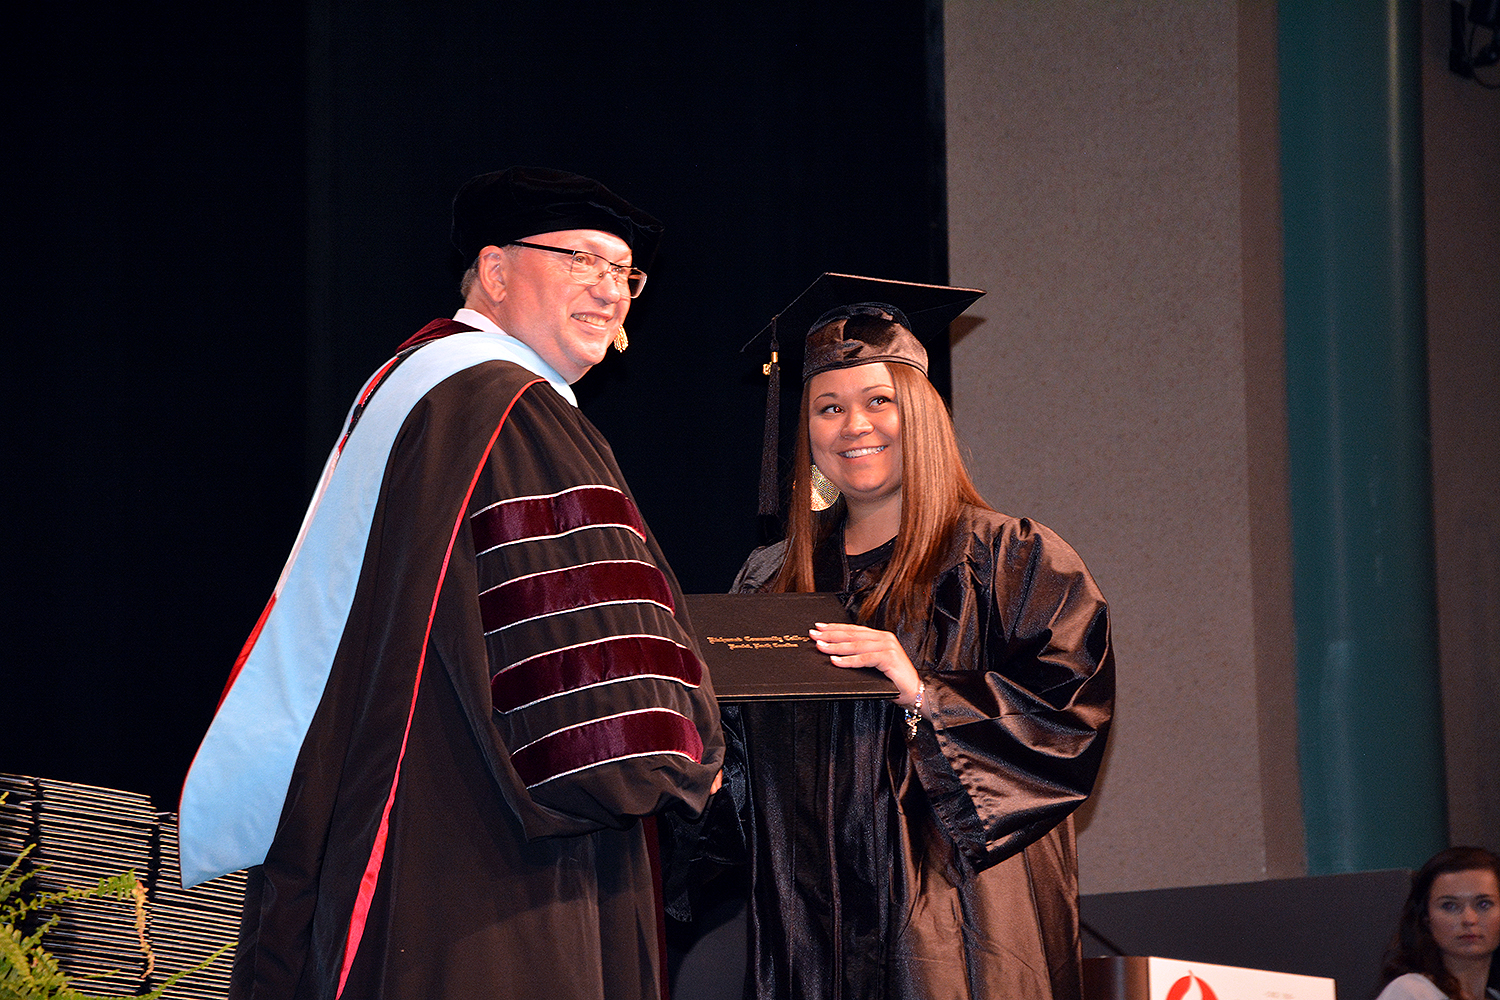 Graduate accepts a diploma and smiles for the camera with Dr. McInnis